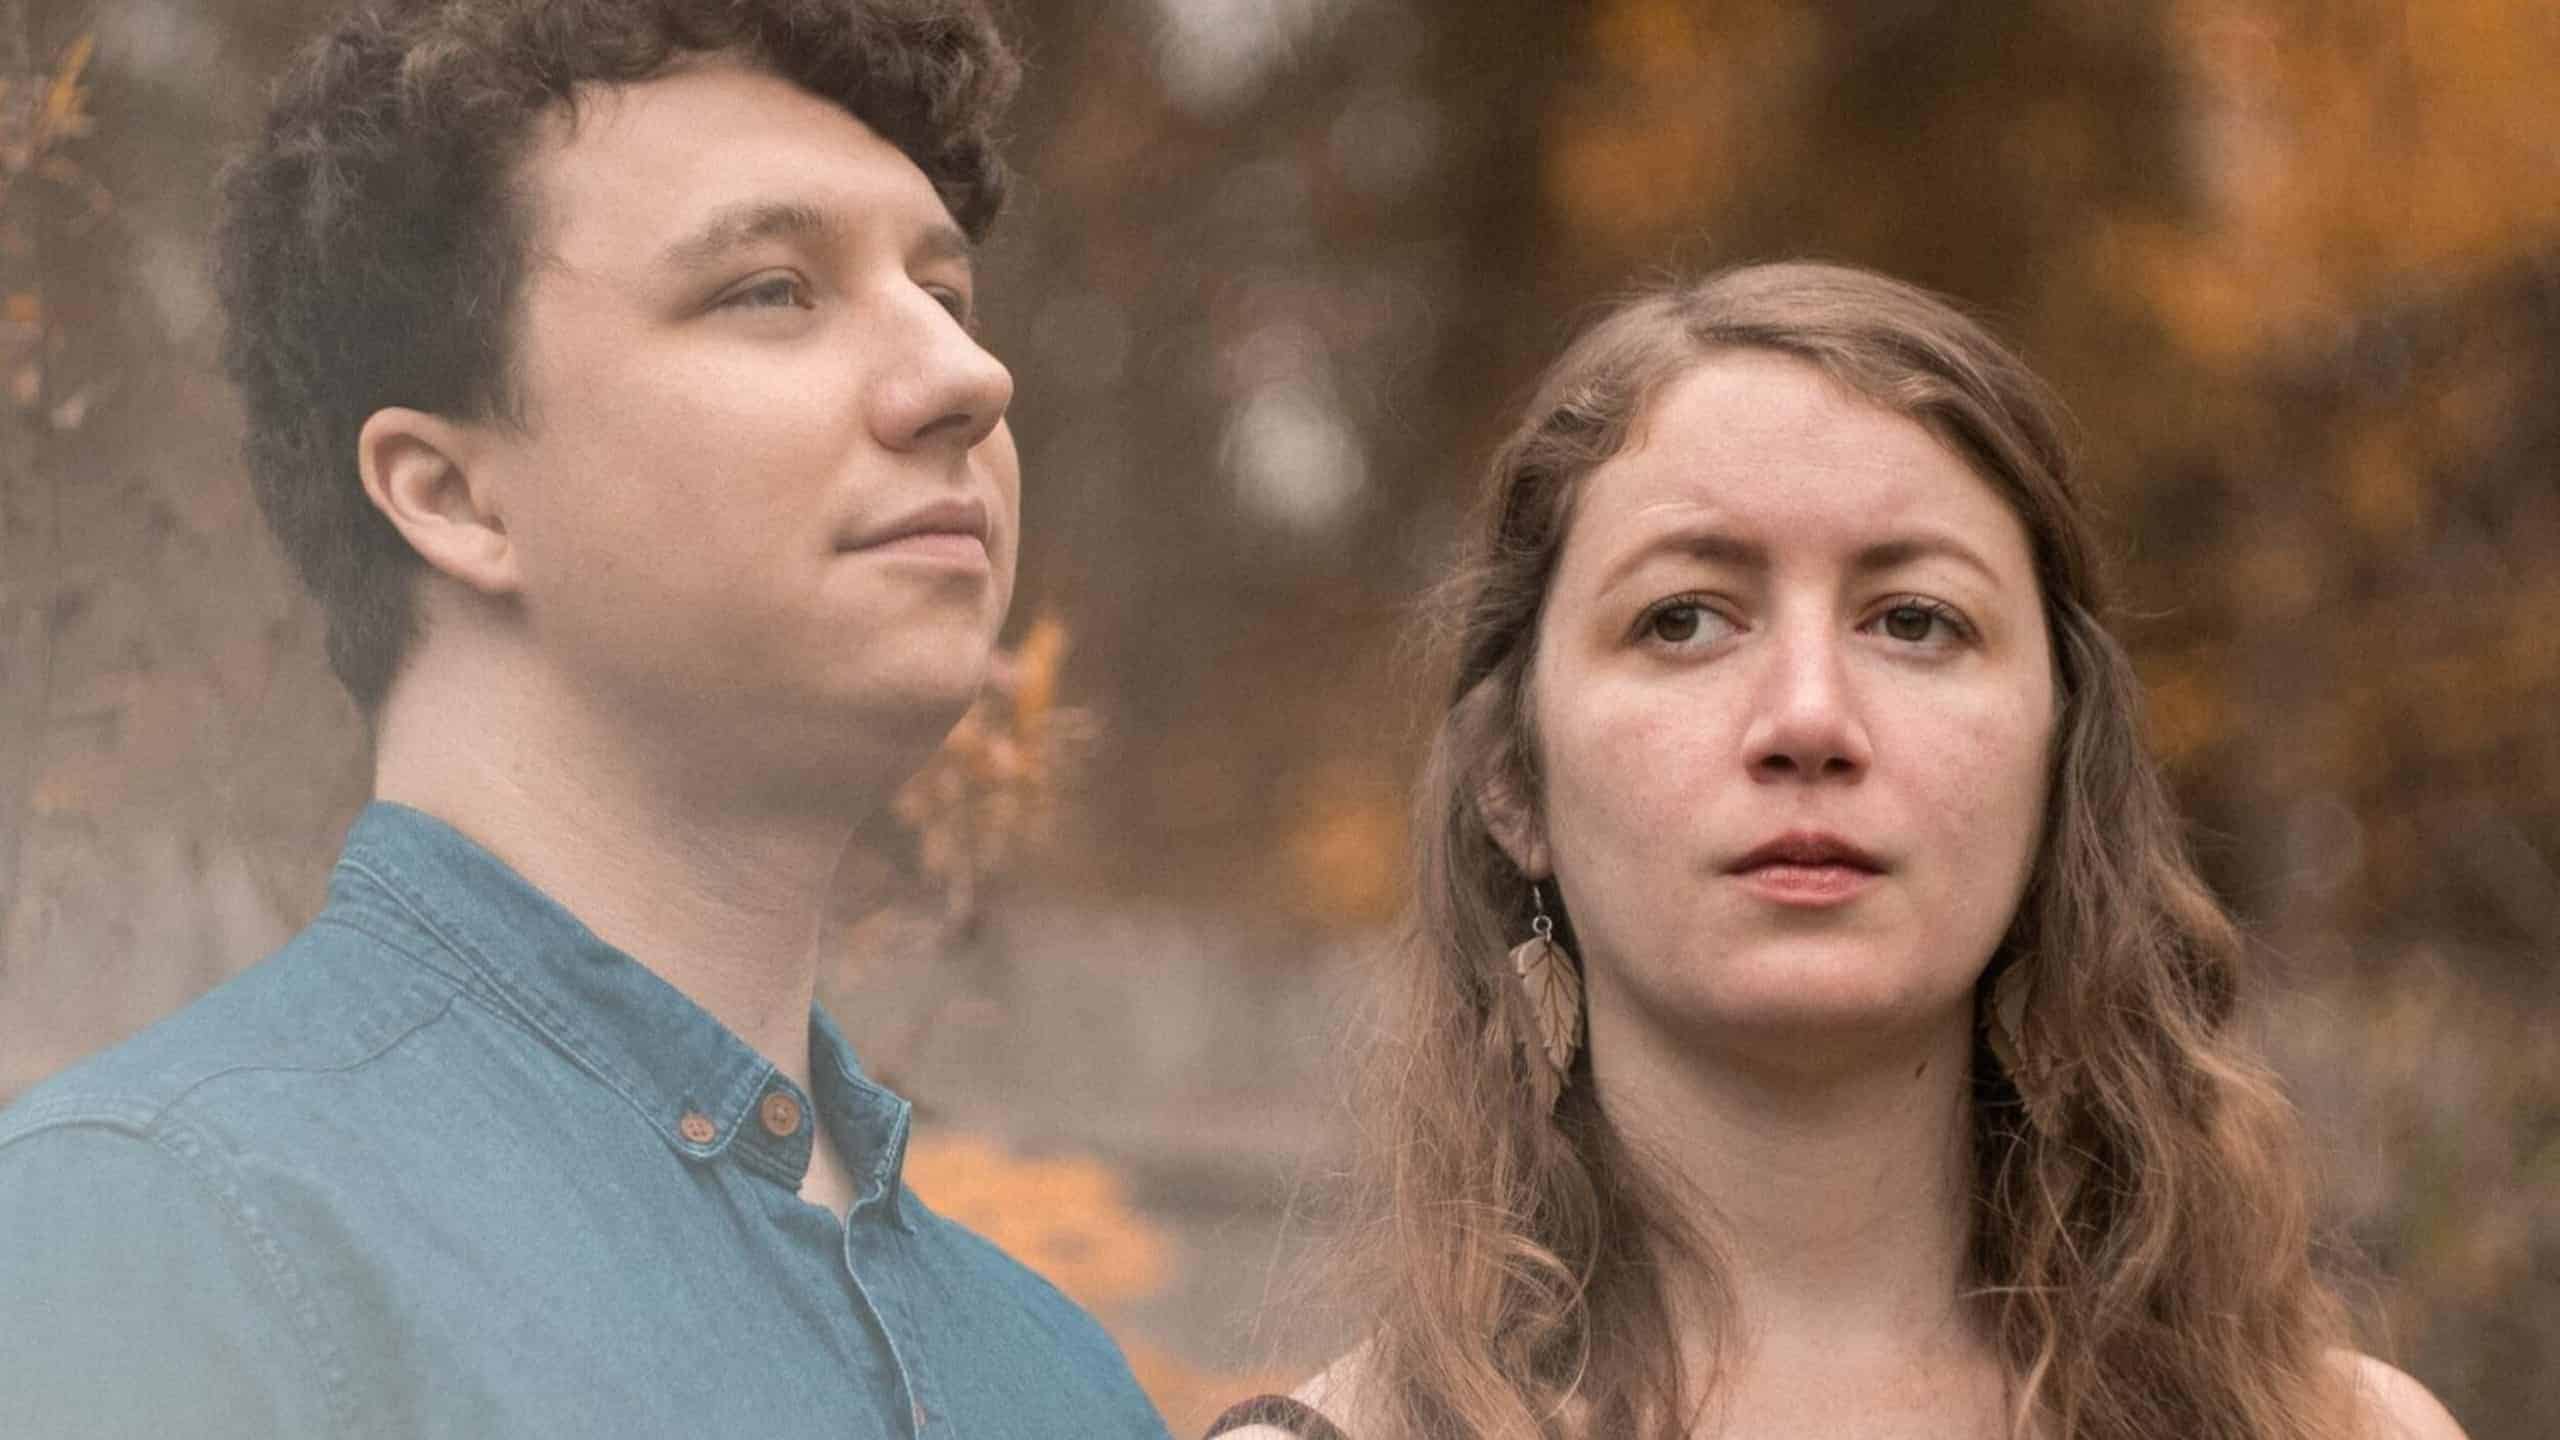 Honeysuckle is a progressive folk act that blends older influences and traditional instrumentation with modern effects and inspiration. A must see duo!